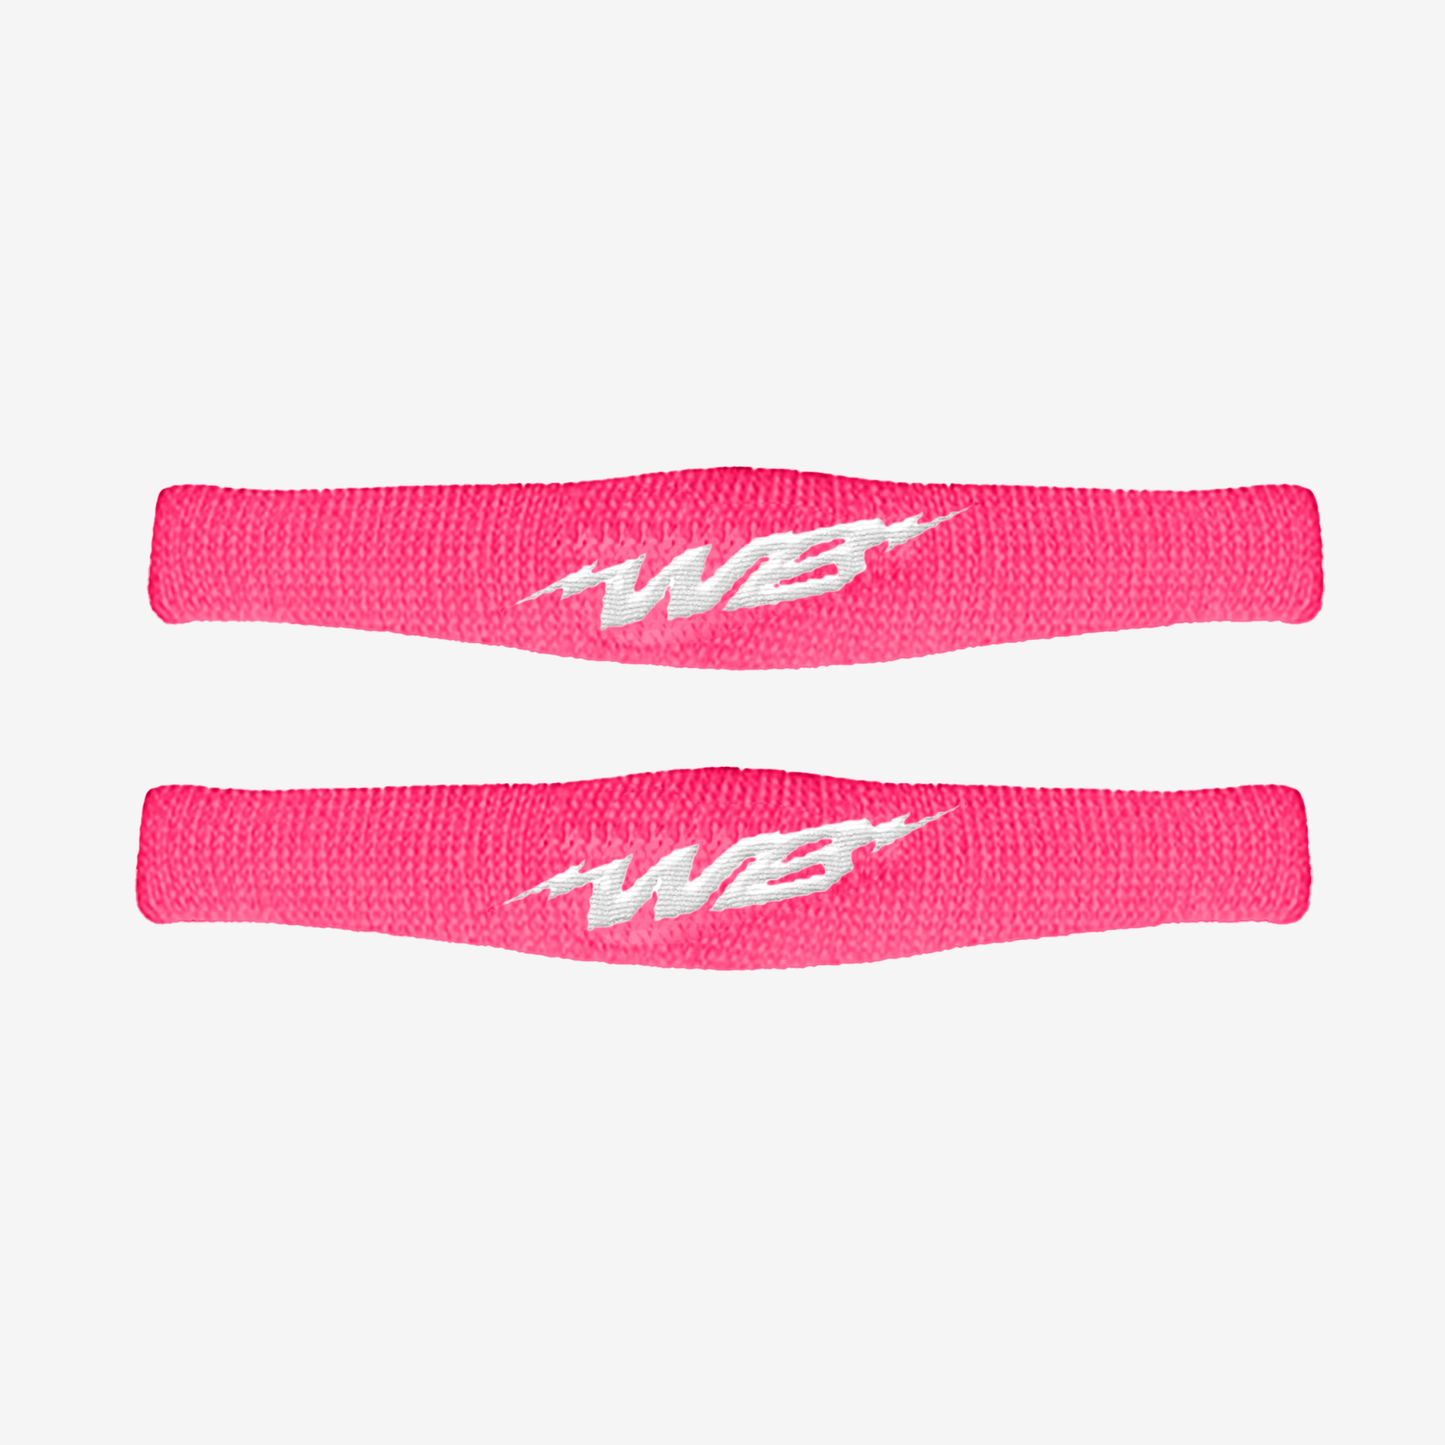 SKINNY BICEP BANDS (2-PACK, PINK) - We Ball Sports